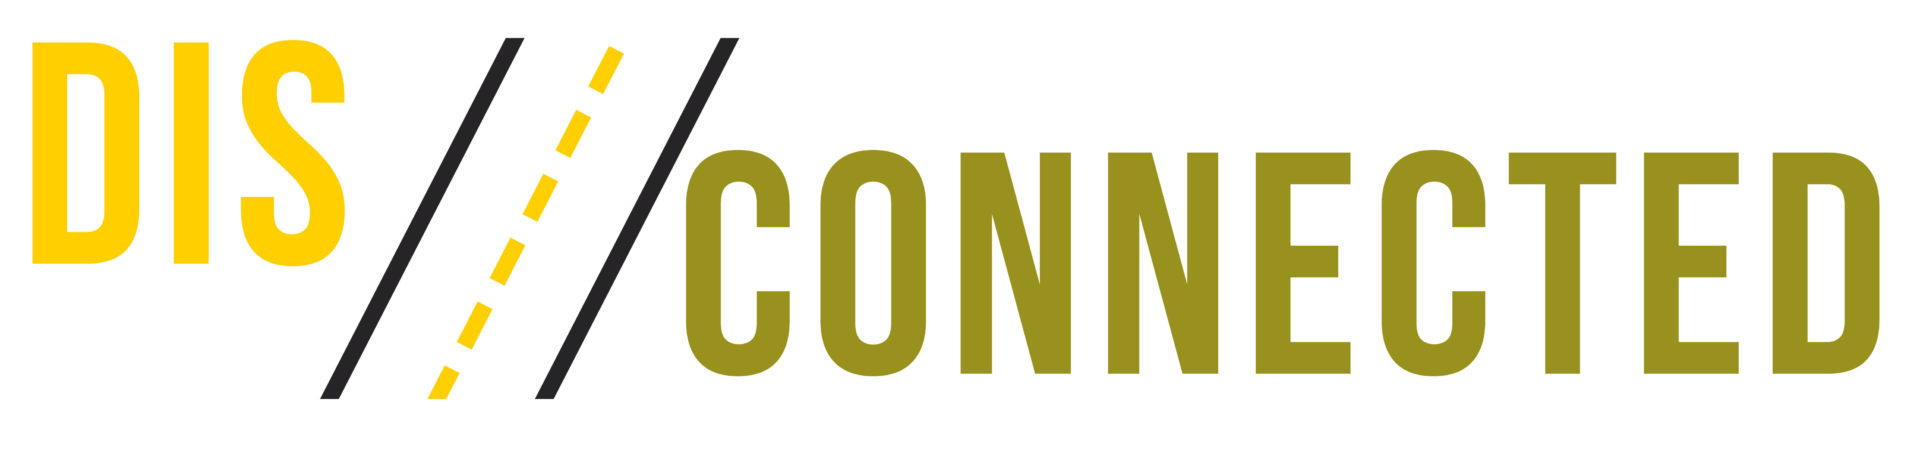 Graphic logo with text "disconnected"